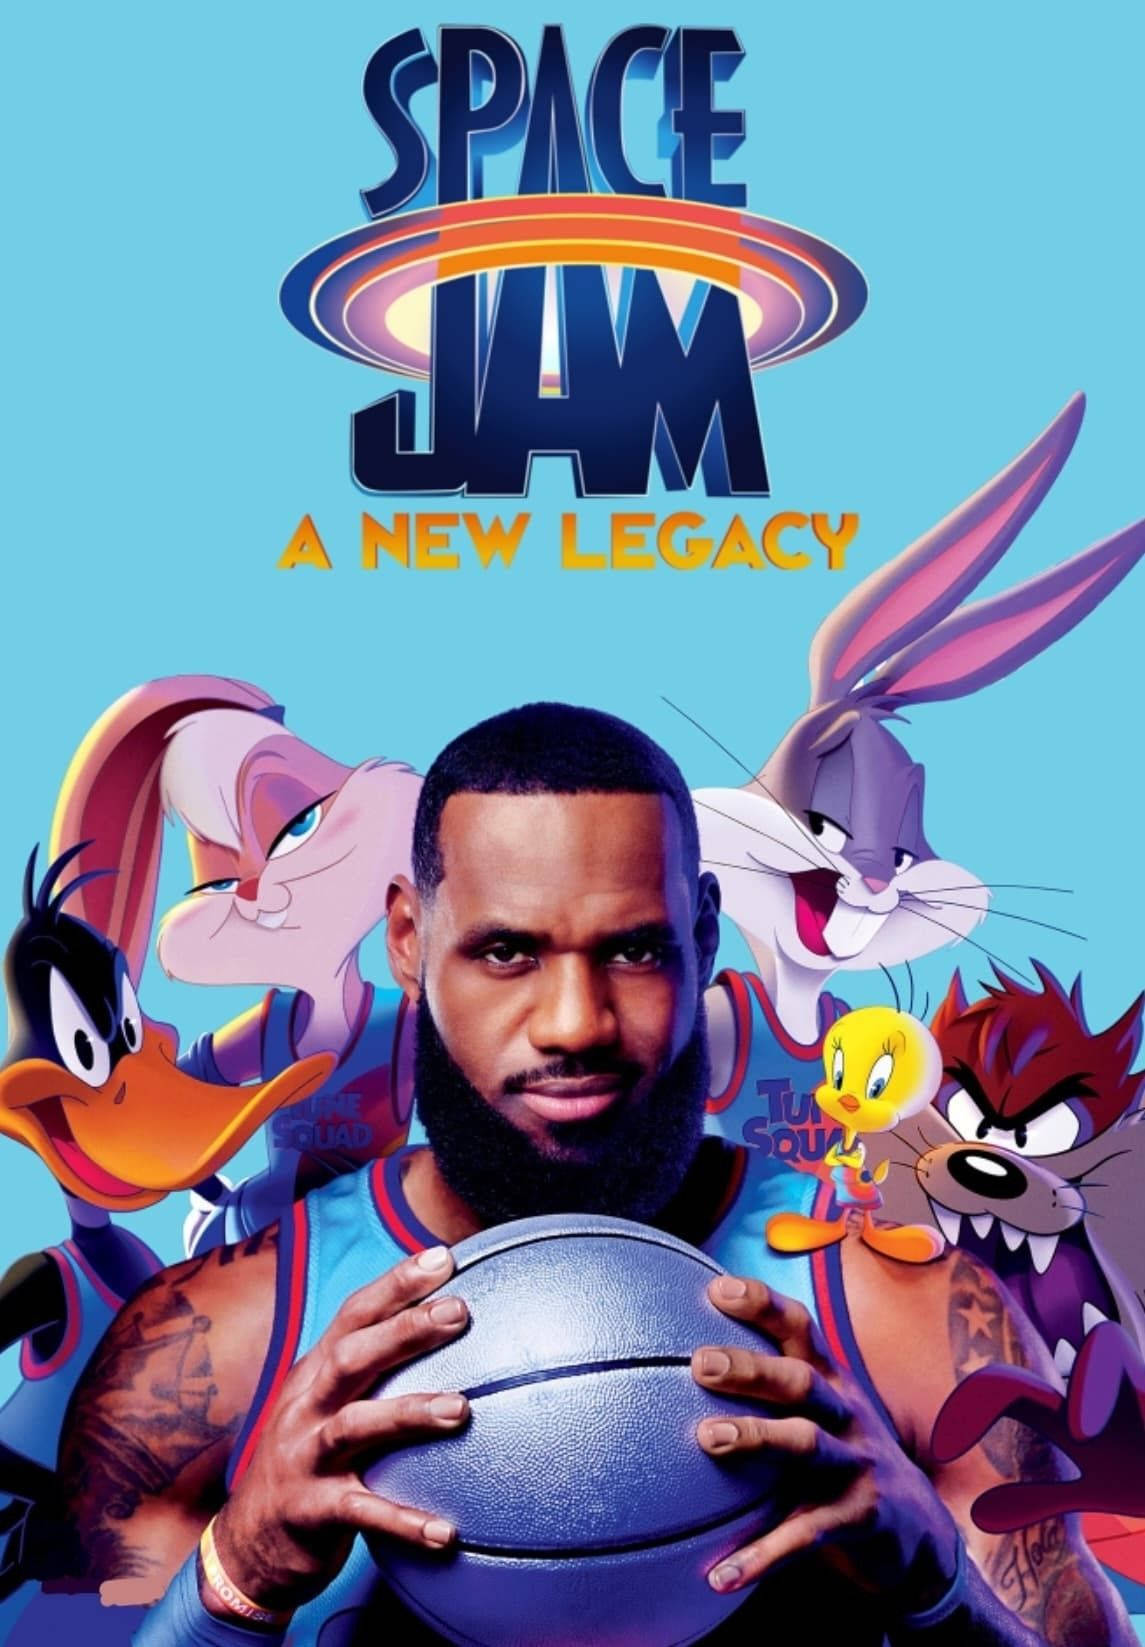 Download Get Ready for Space Jam 2: The Return Wallpaper | Wallpapers.com